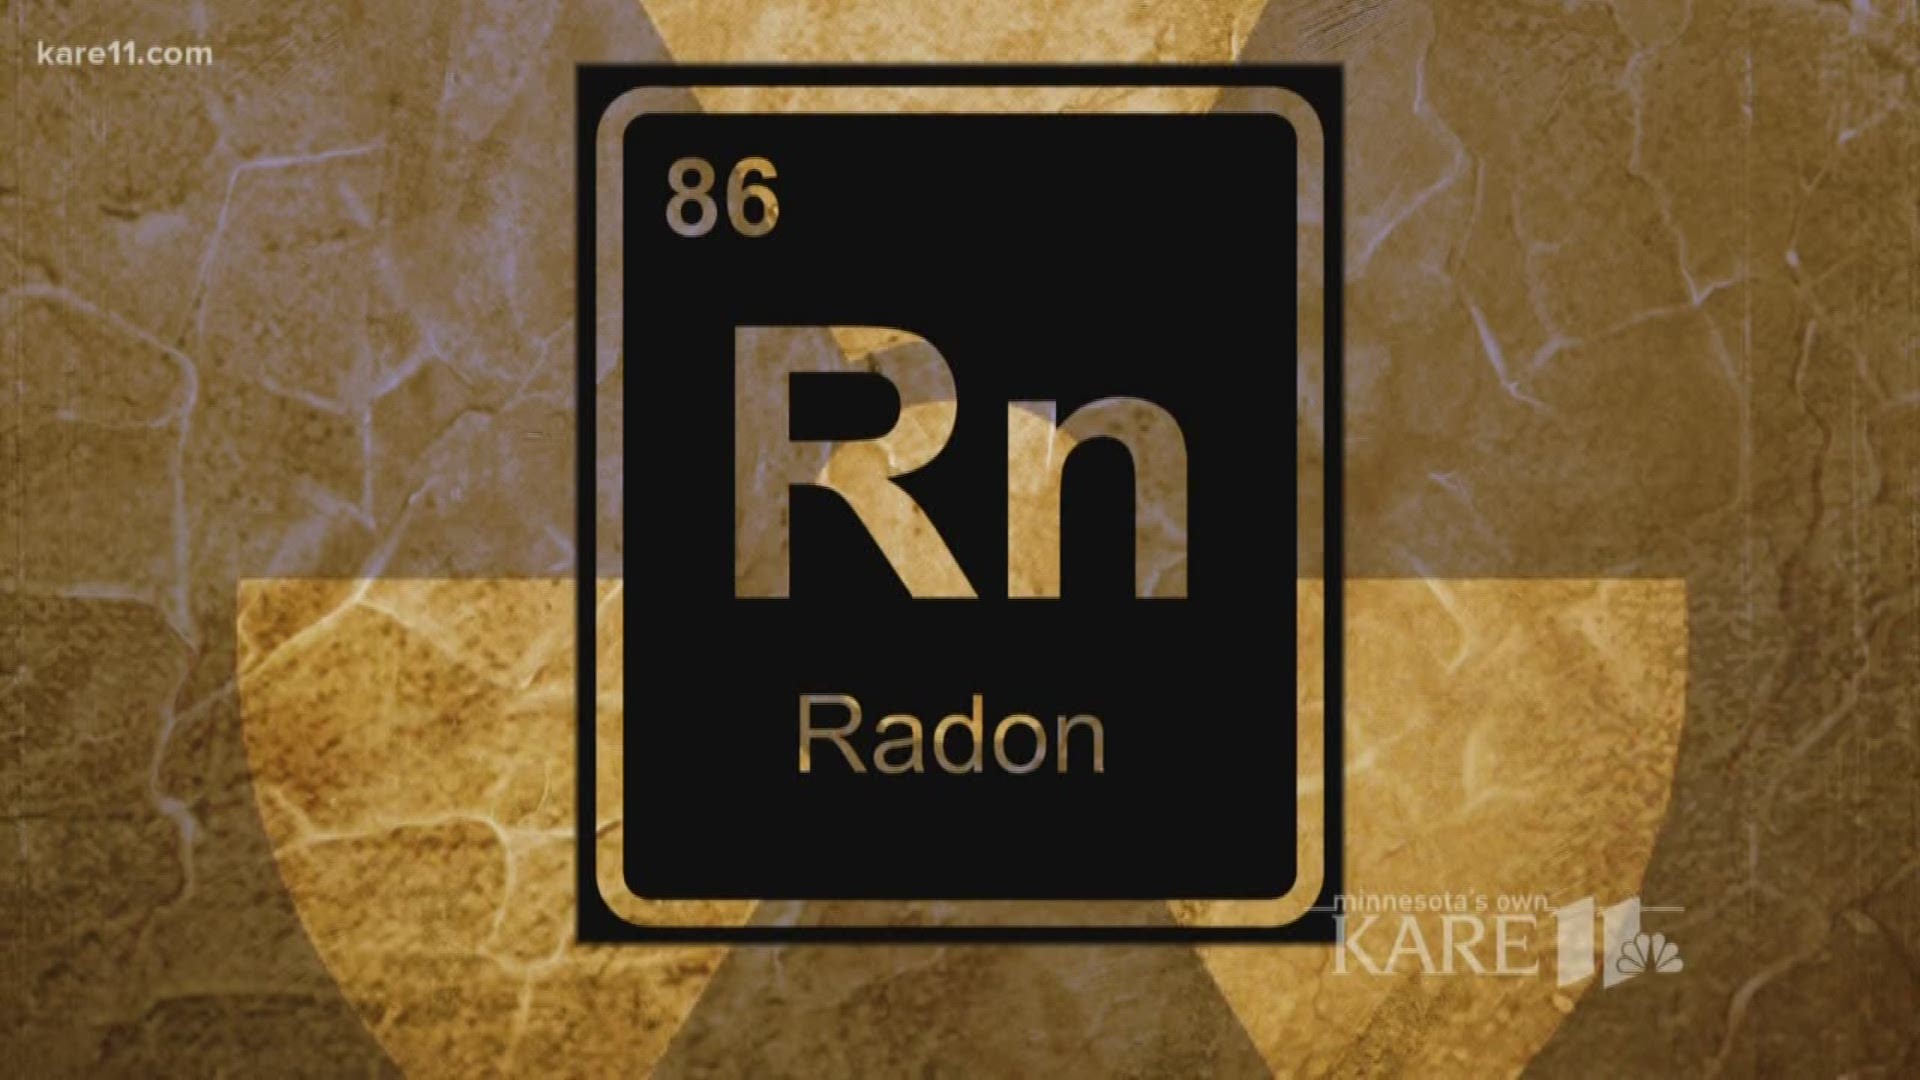 Despite state and federal recommendations, only 53 of 331 school districts in Minnesota report they have tested classrooms for radon since 2012. KARE 11 found out which Twin Cities area districts are testing - and which ones are not. https://kare11.tv/2wm